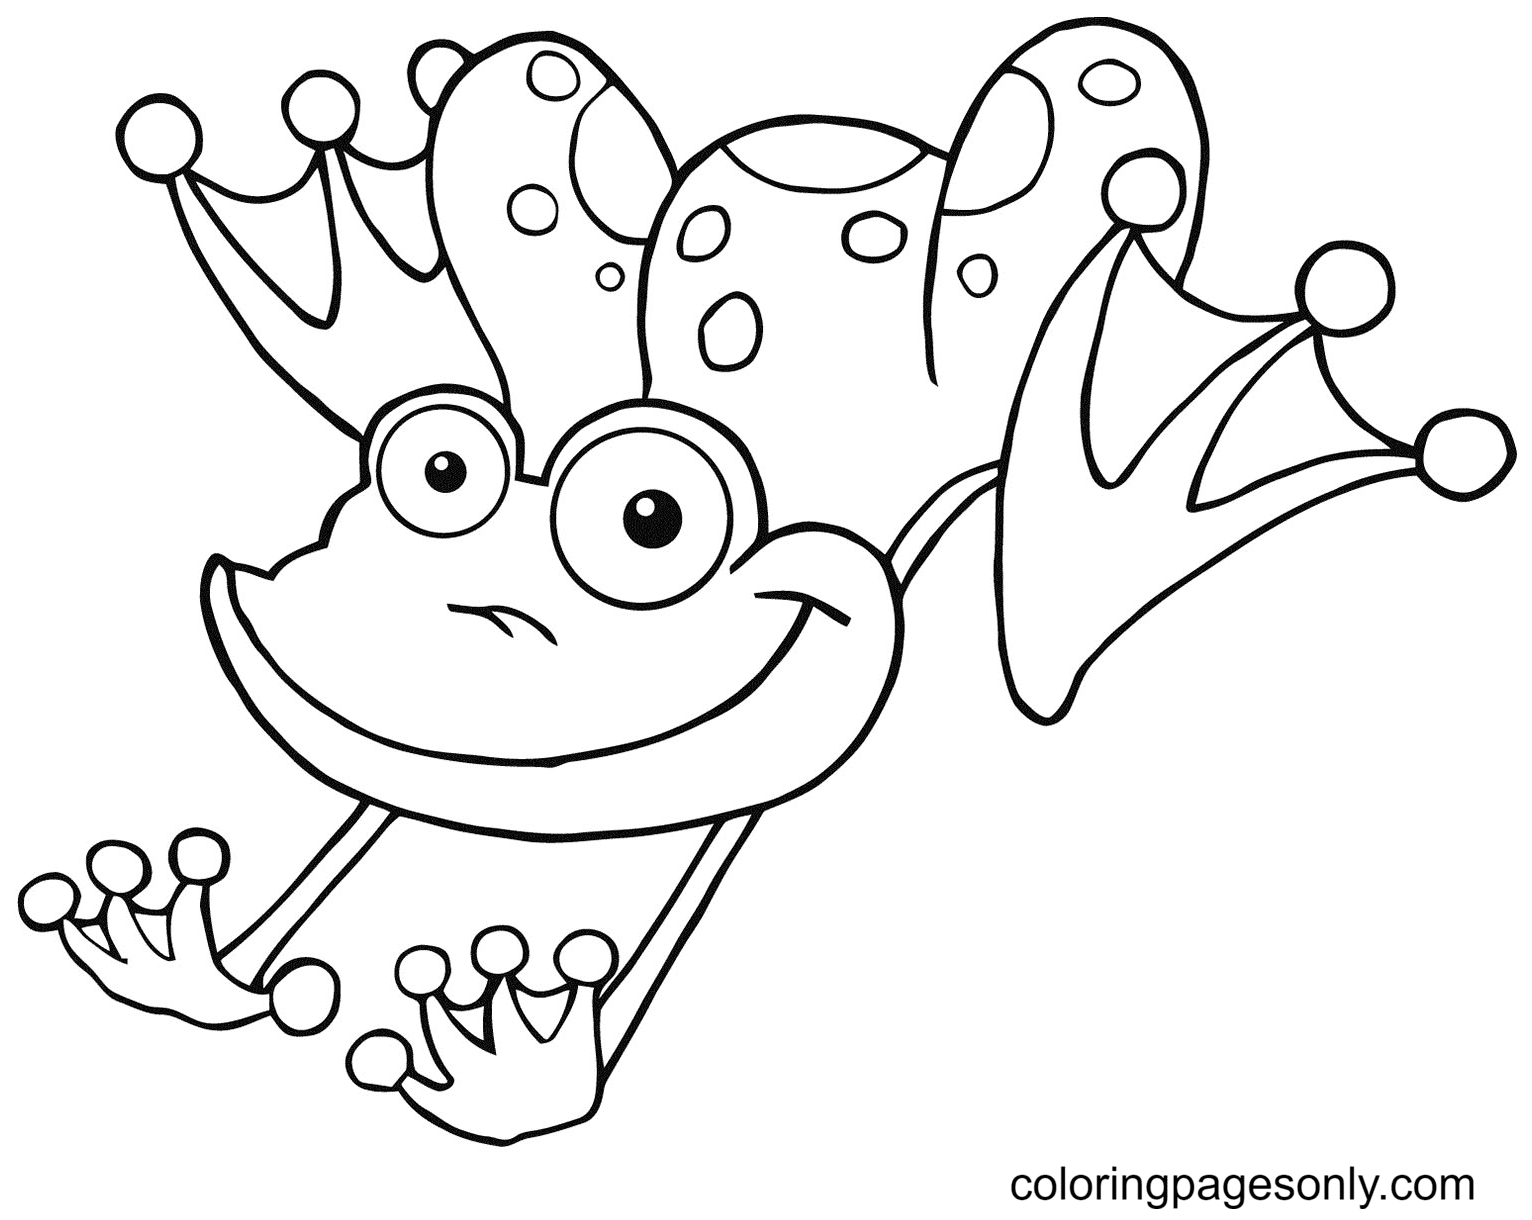 Funny Frog Coloring Page